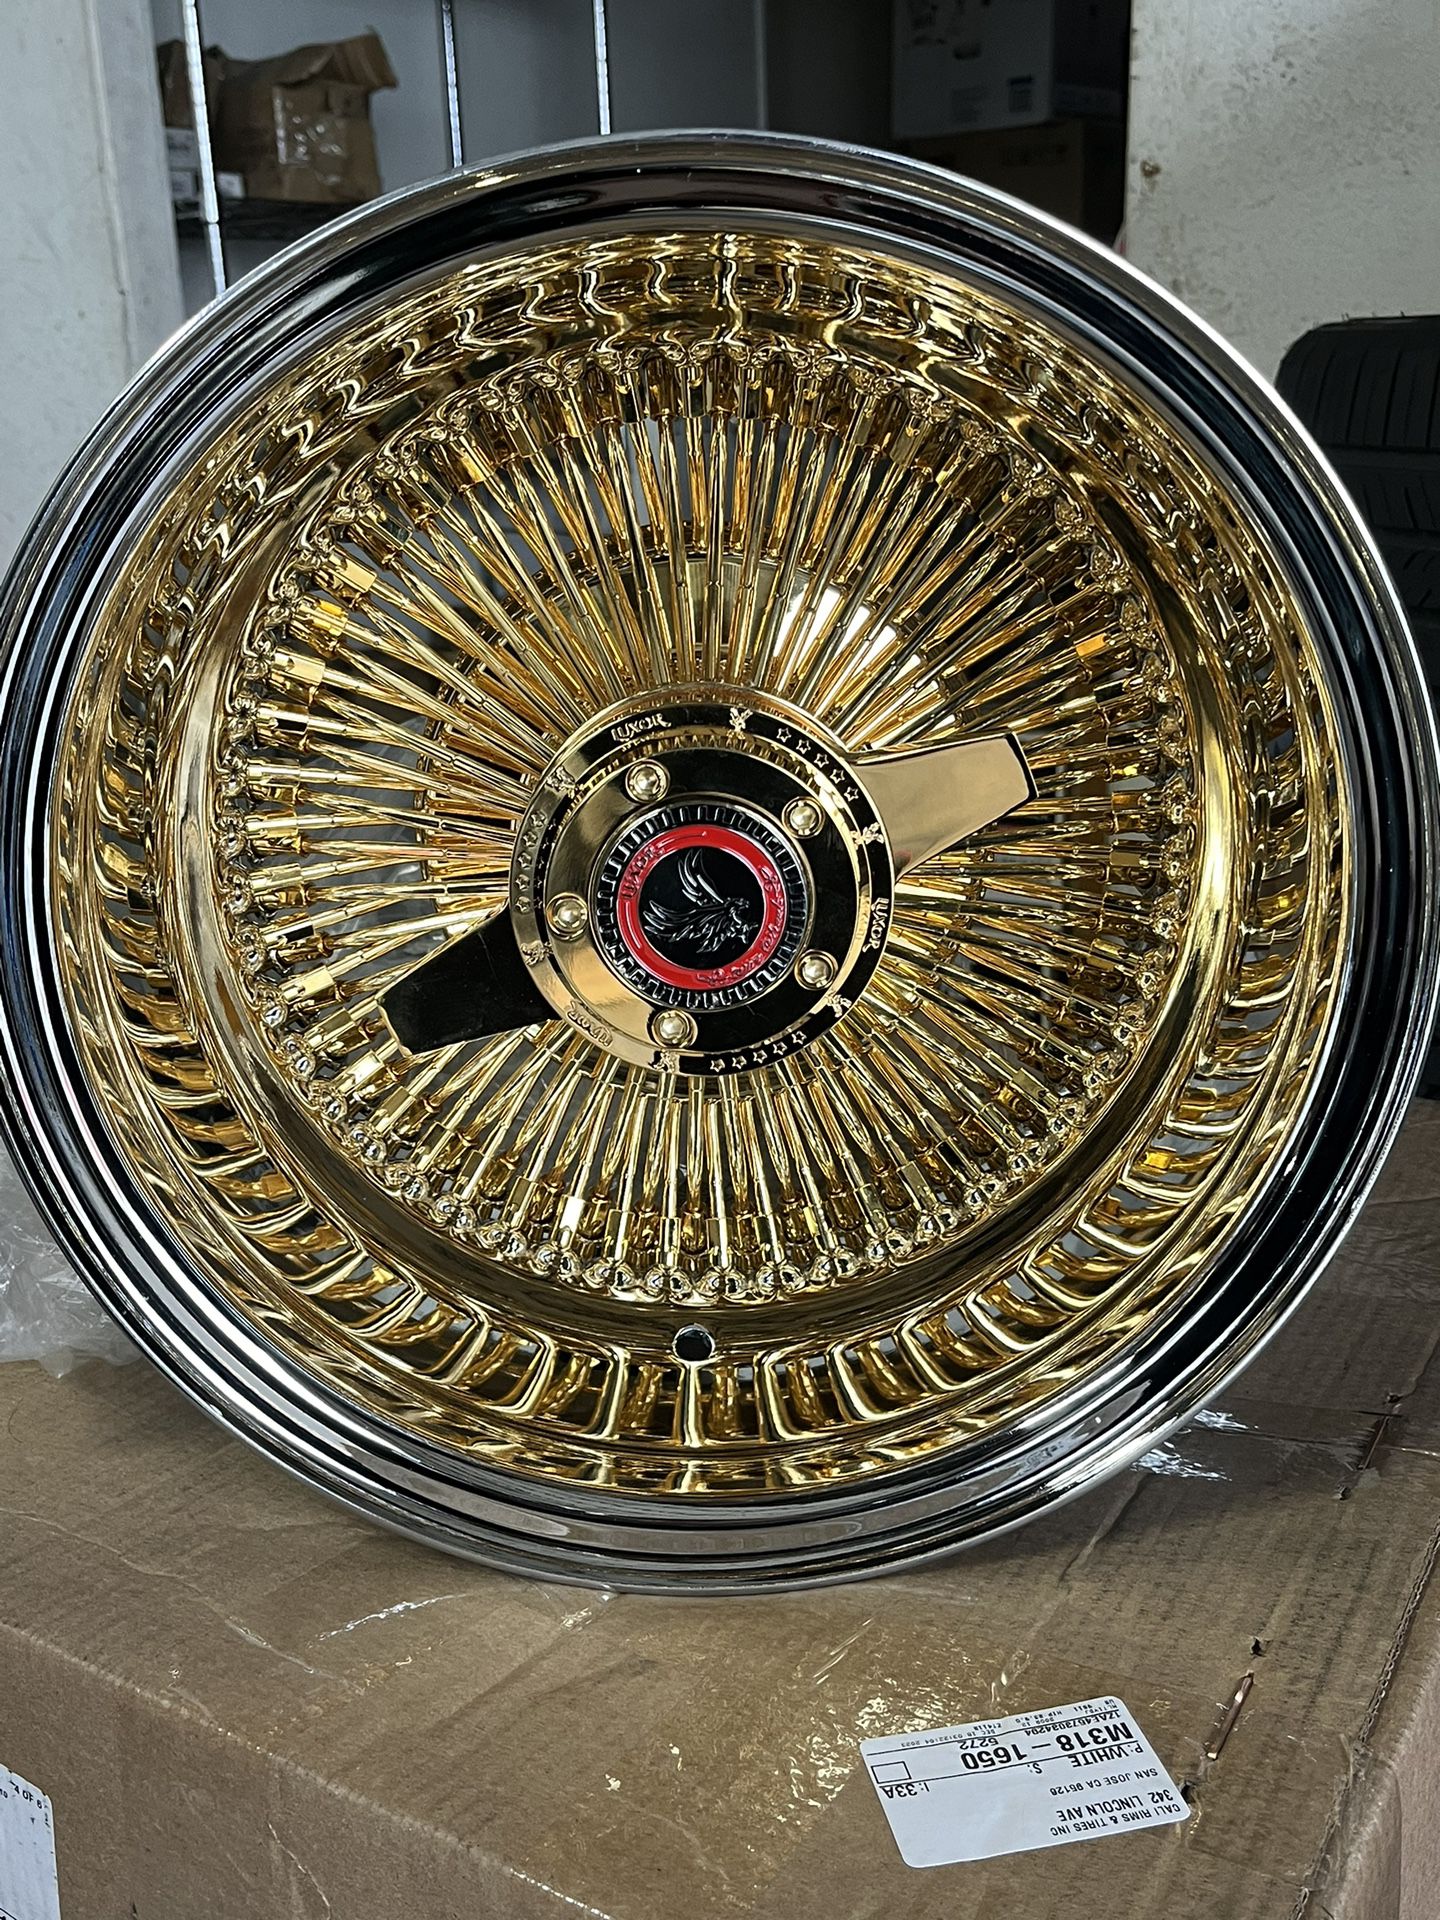 Wire Wheels 13x7 100 Spokes Center Gold with White wall tires on Chevy Impala💰208 New wheels tires